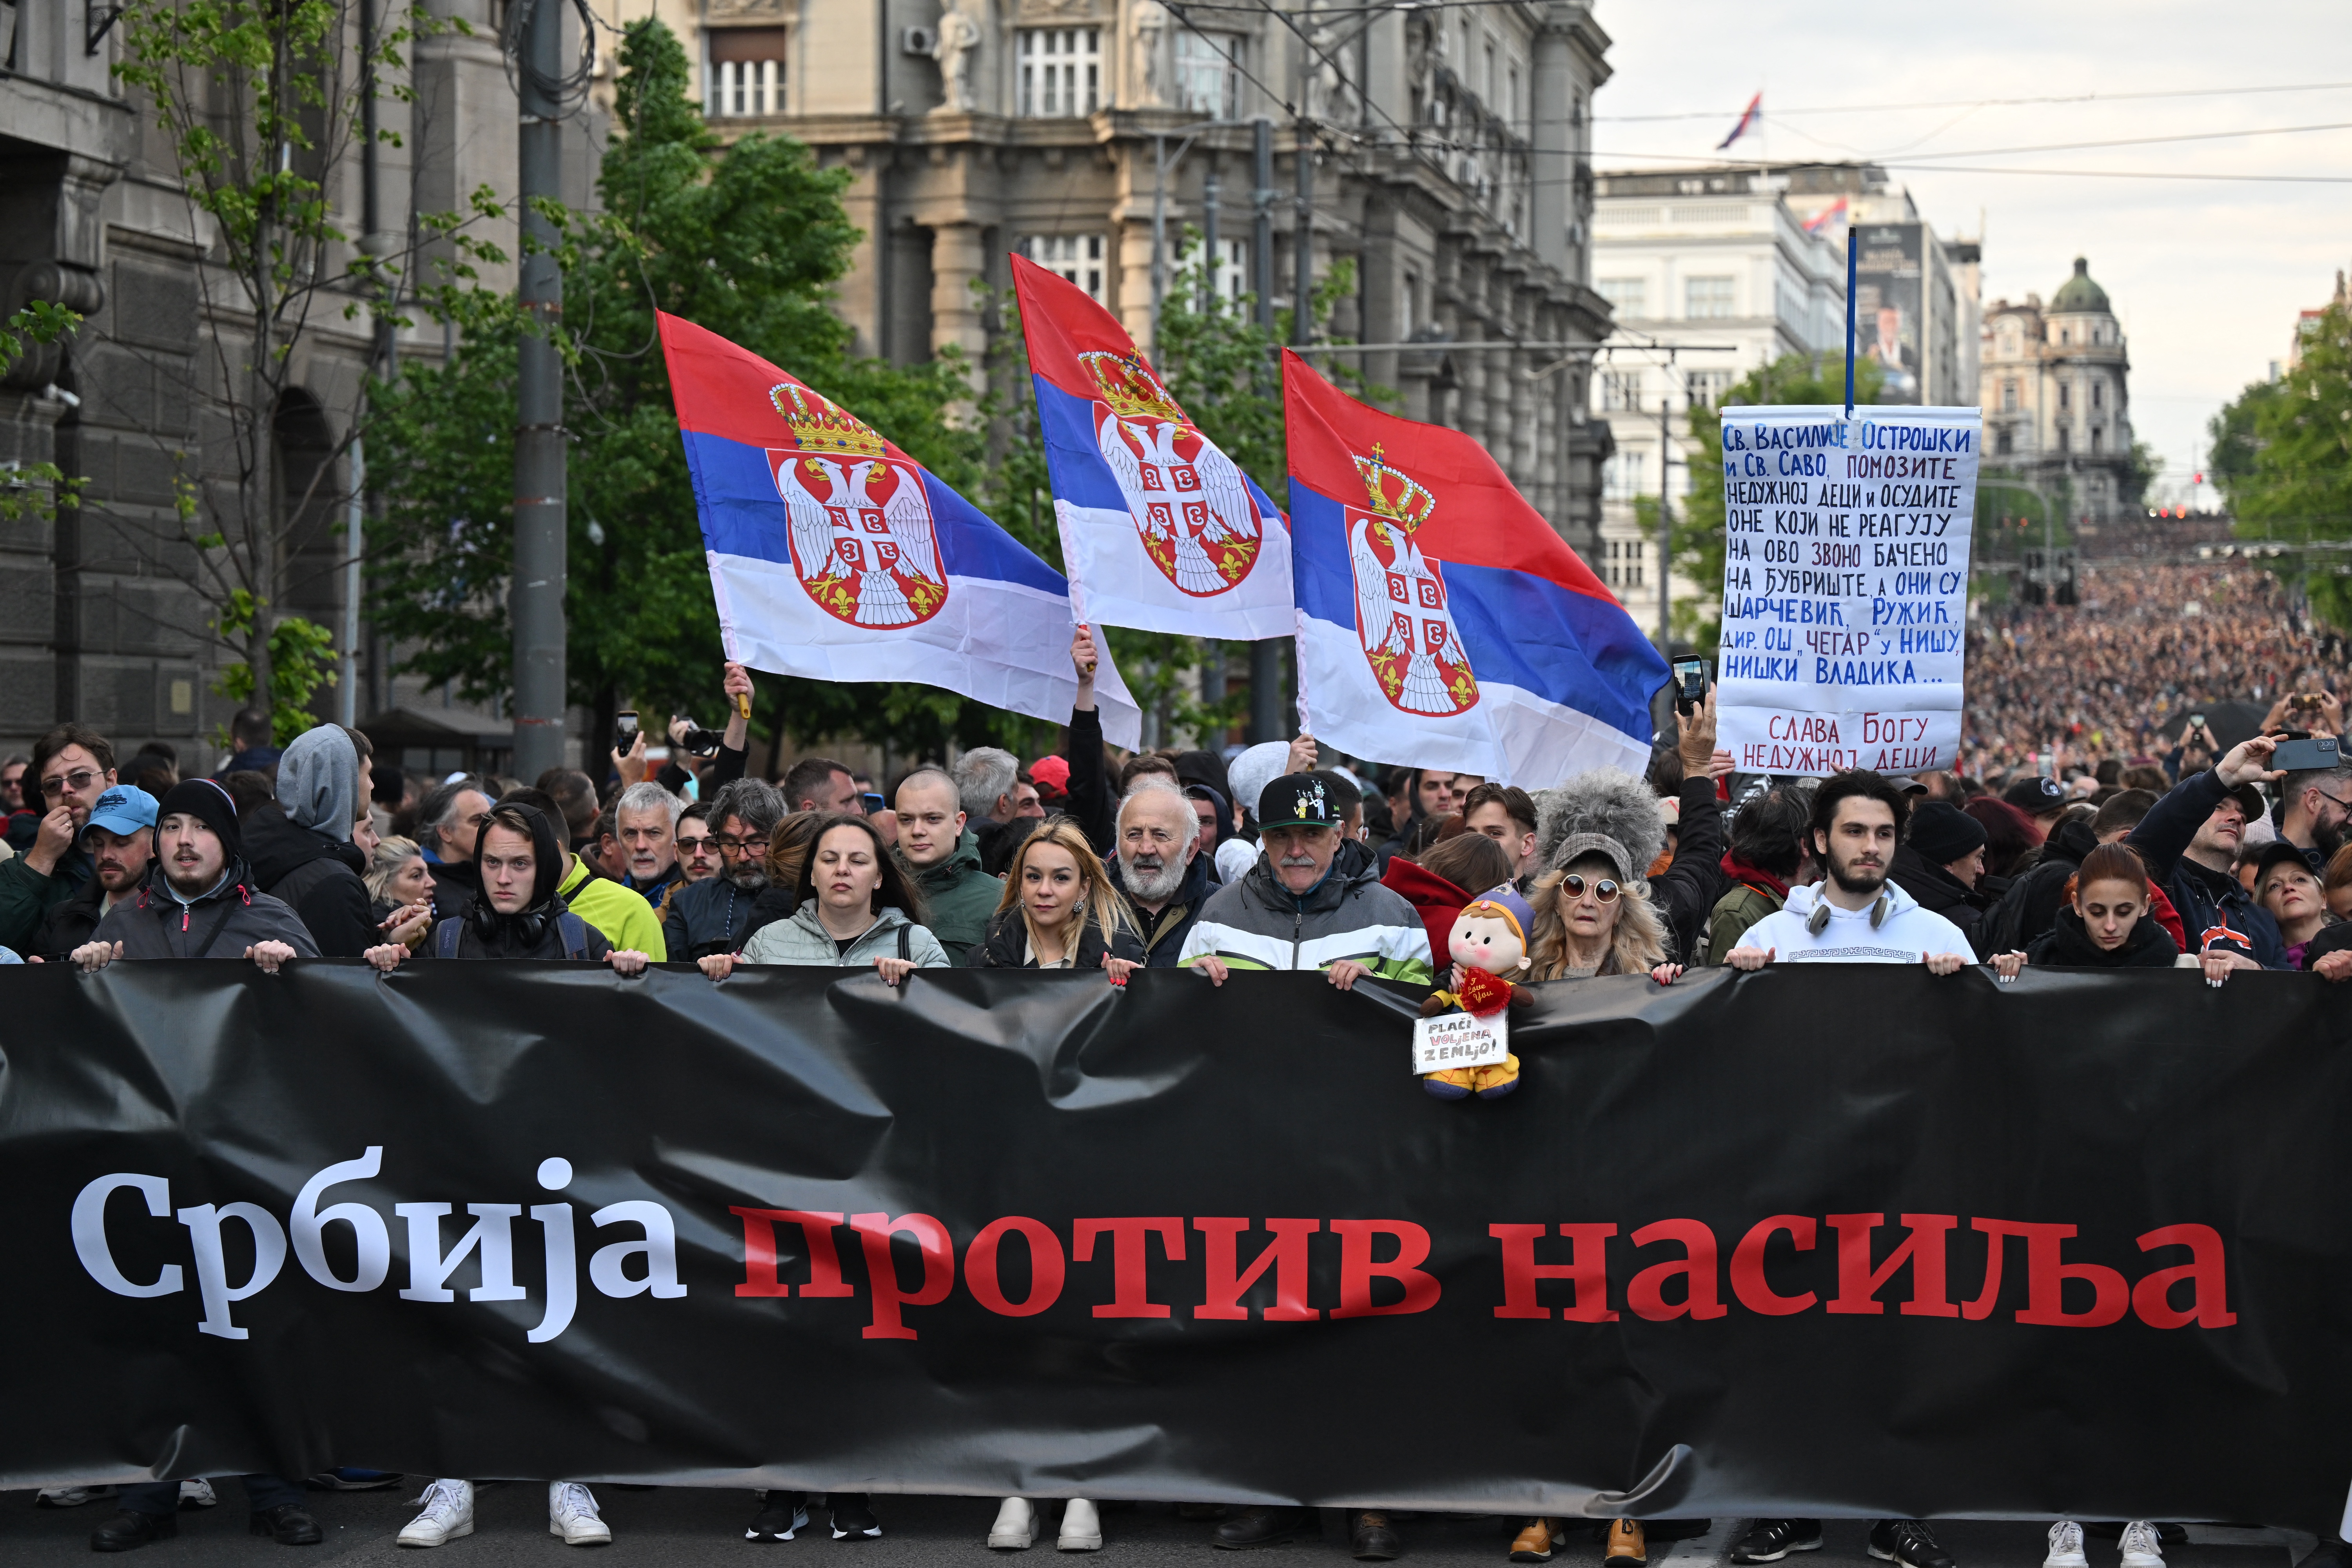 Serbia: RSF urges the authorities to put an end to the toxic regulation of media